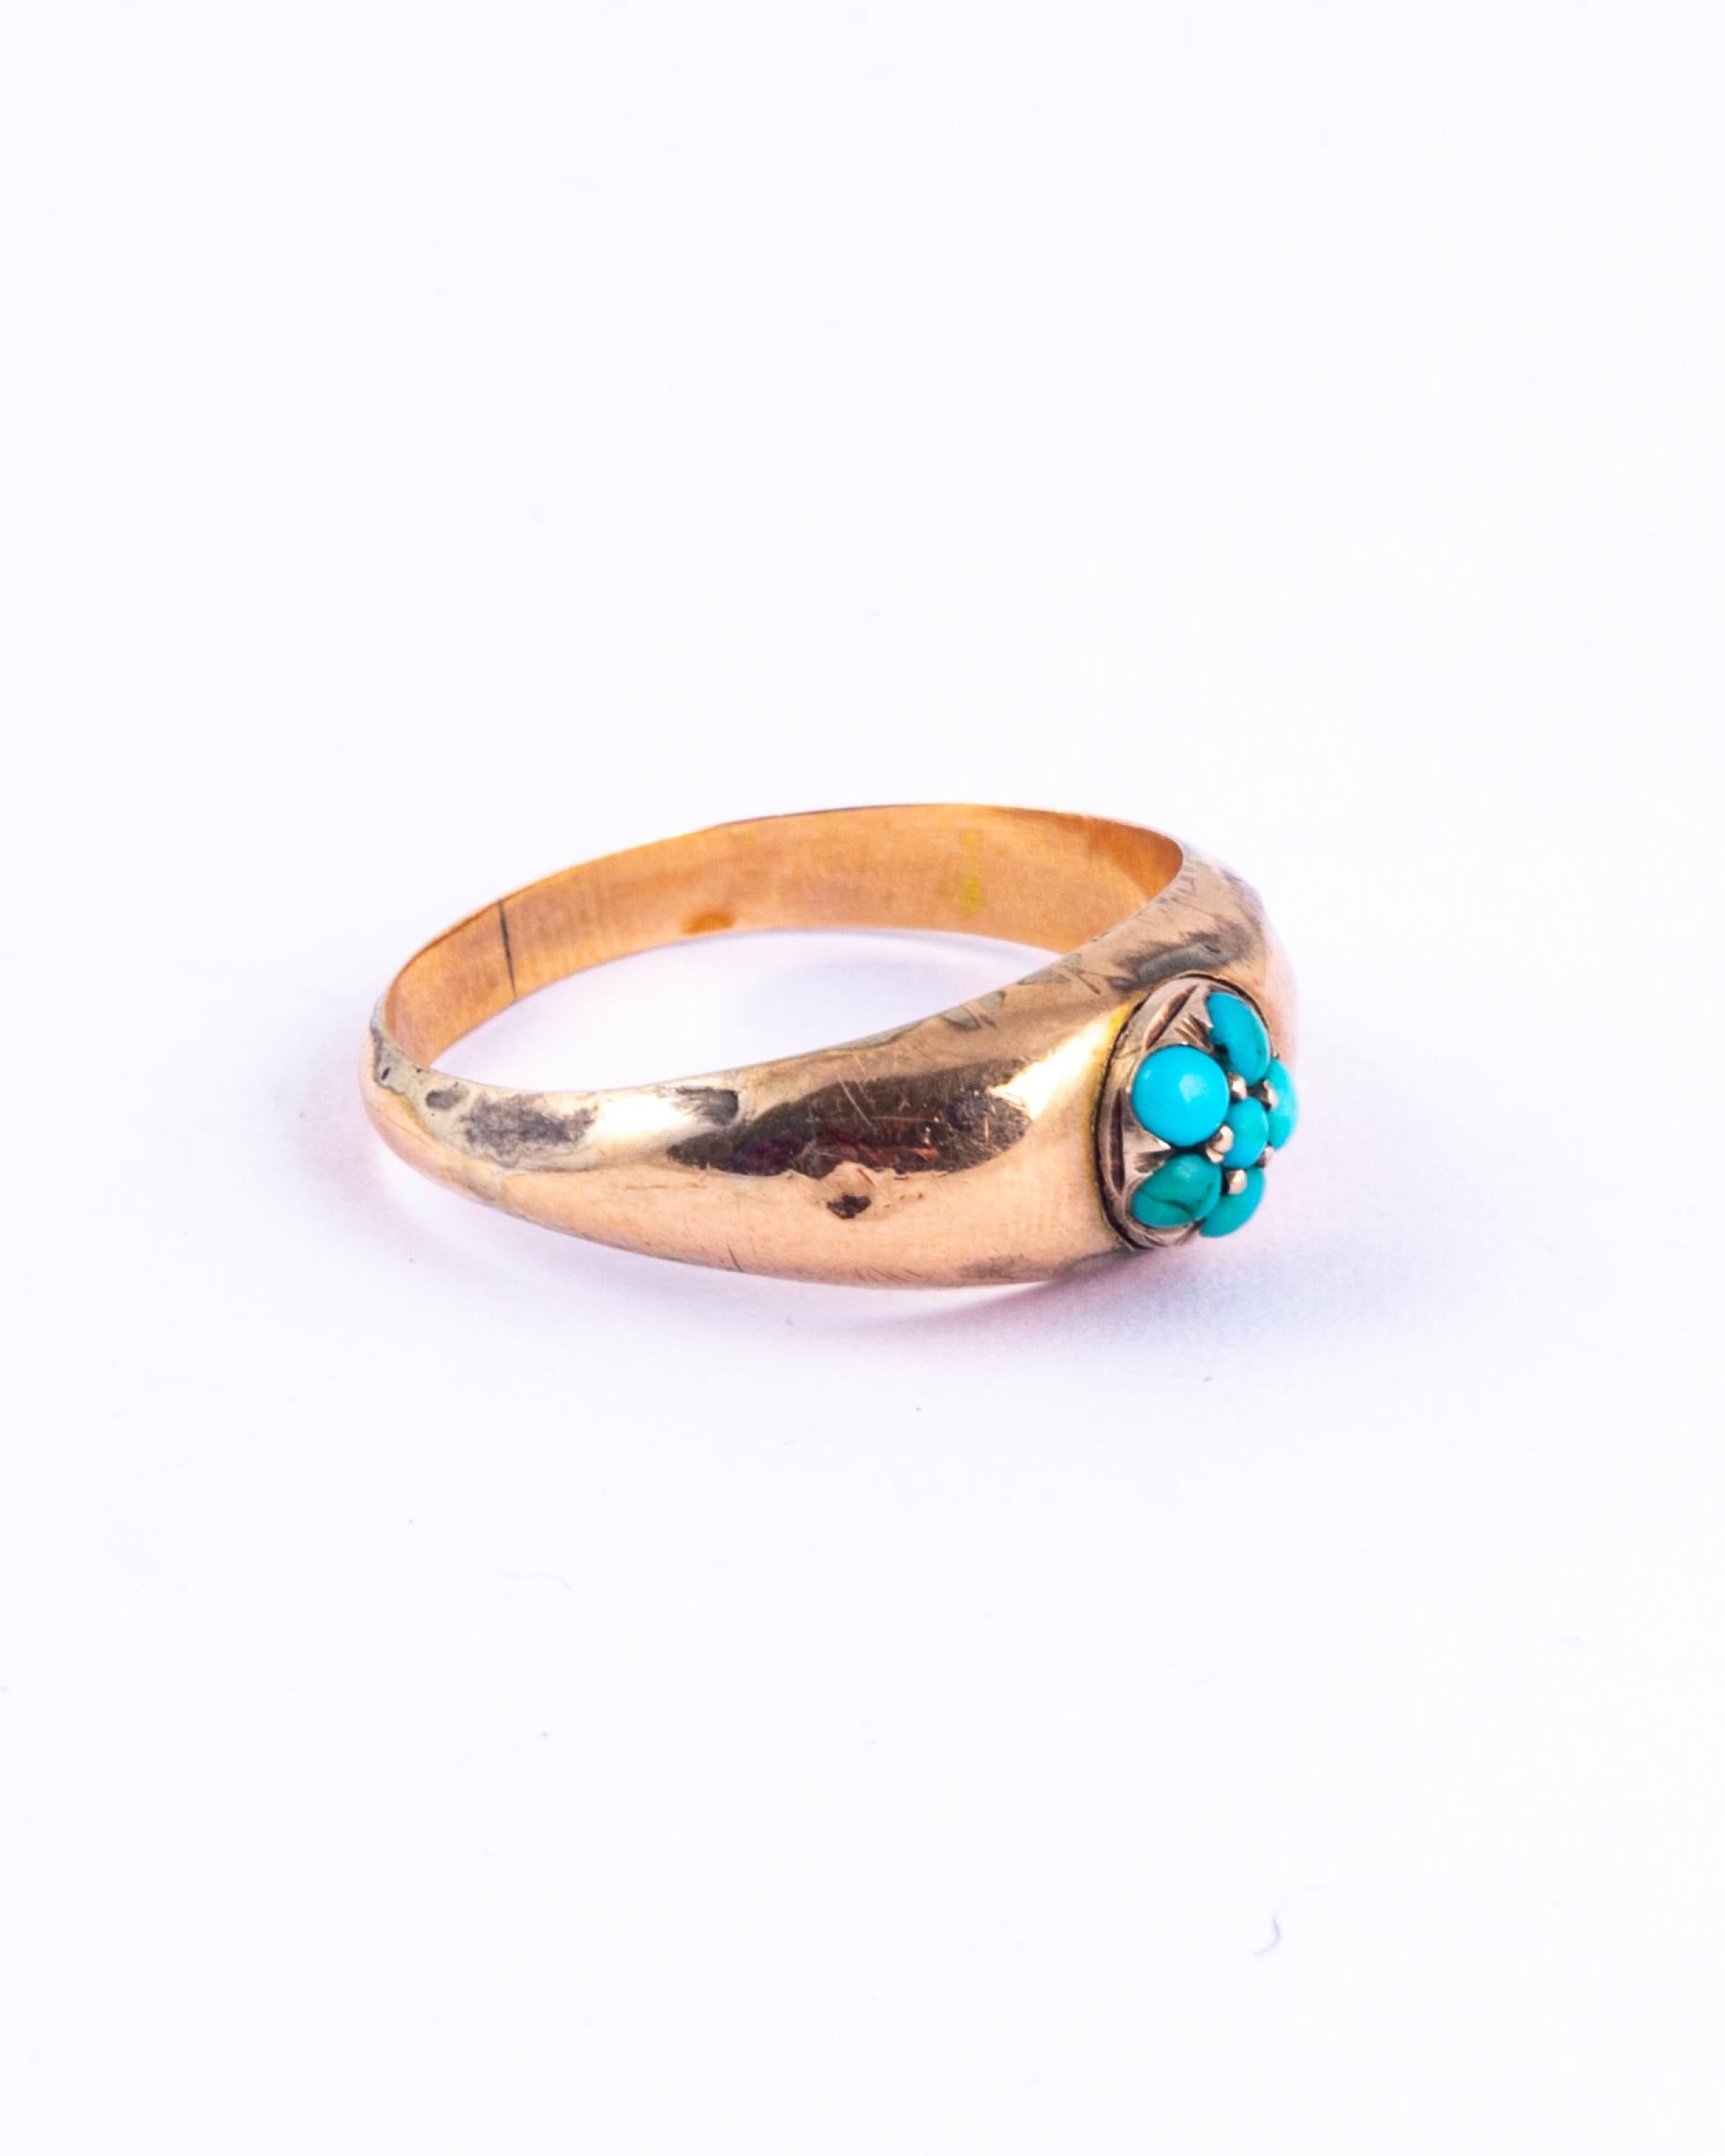 This victorian beauty has six turquoise stones that pop next to the 9ct gold shank. The cluster is perched in a round setting on top of the chunky band. 

Ring Size: N or 6 3/4 
Cluster Diameter: 7.5mm

Weight: 1.48g